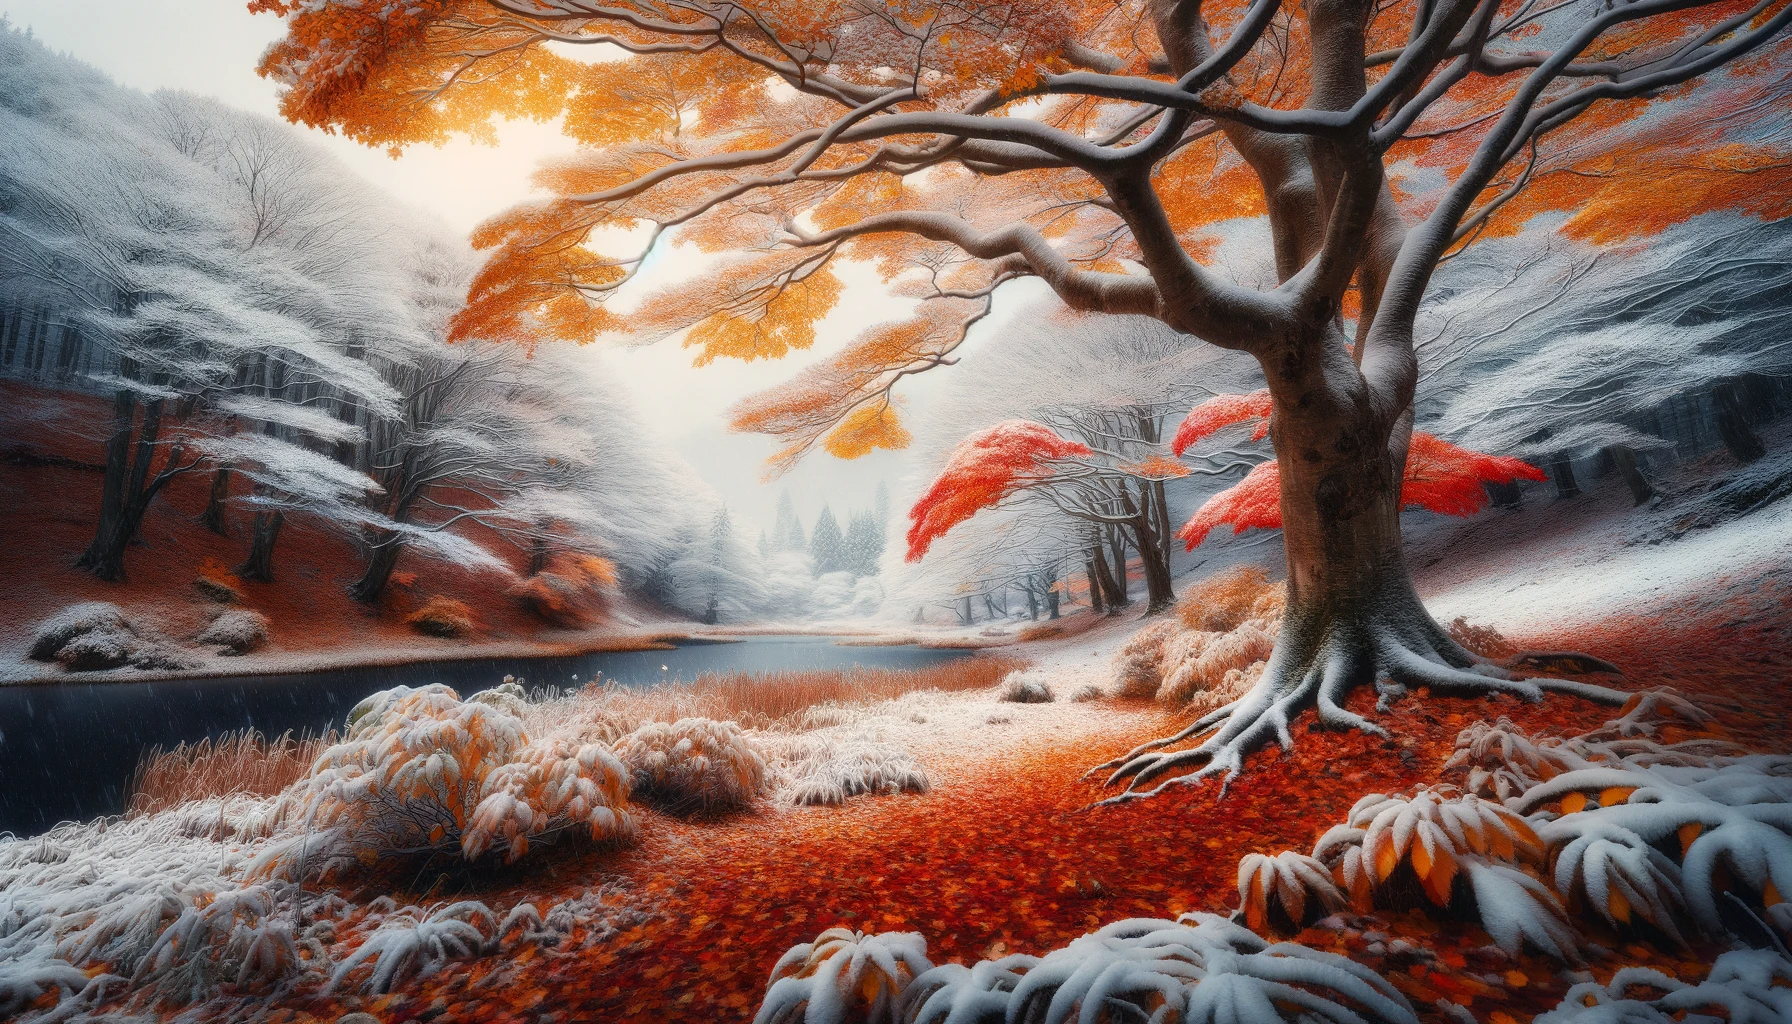 A serene, snow-covered landscape transitioning from autumn to winter. The scene is peaceful with a mix of the last vibrant autumn leaves on some trees and the ground, and the rest covered in a soft blanket of snow. The sky is overcast, hinting at the cold air, and the overall atmosphere is one of quiet and tranquility, capturing the essence of the changing seasons. The image should convey a feeling of peacefulness and the unique stillness that comes with the first snowfall, using professional photography techniques to enhance the beauty of the transition.